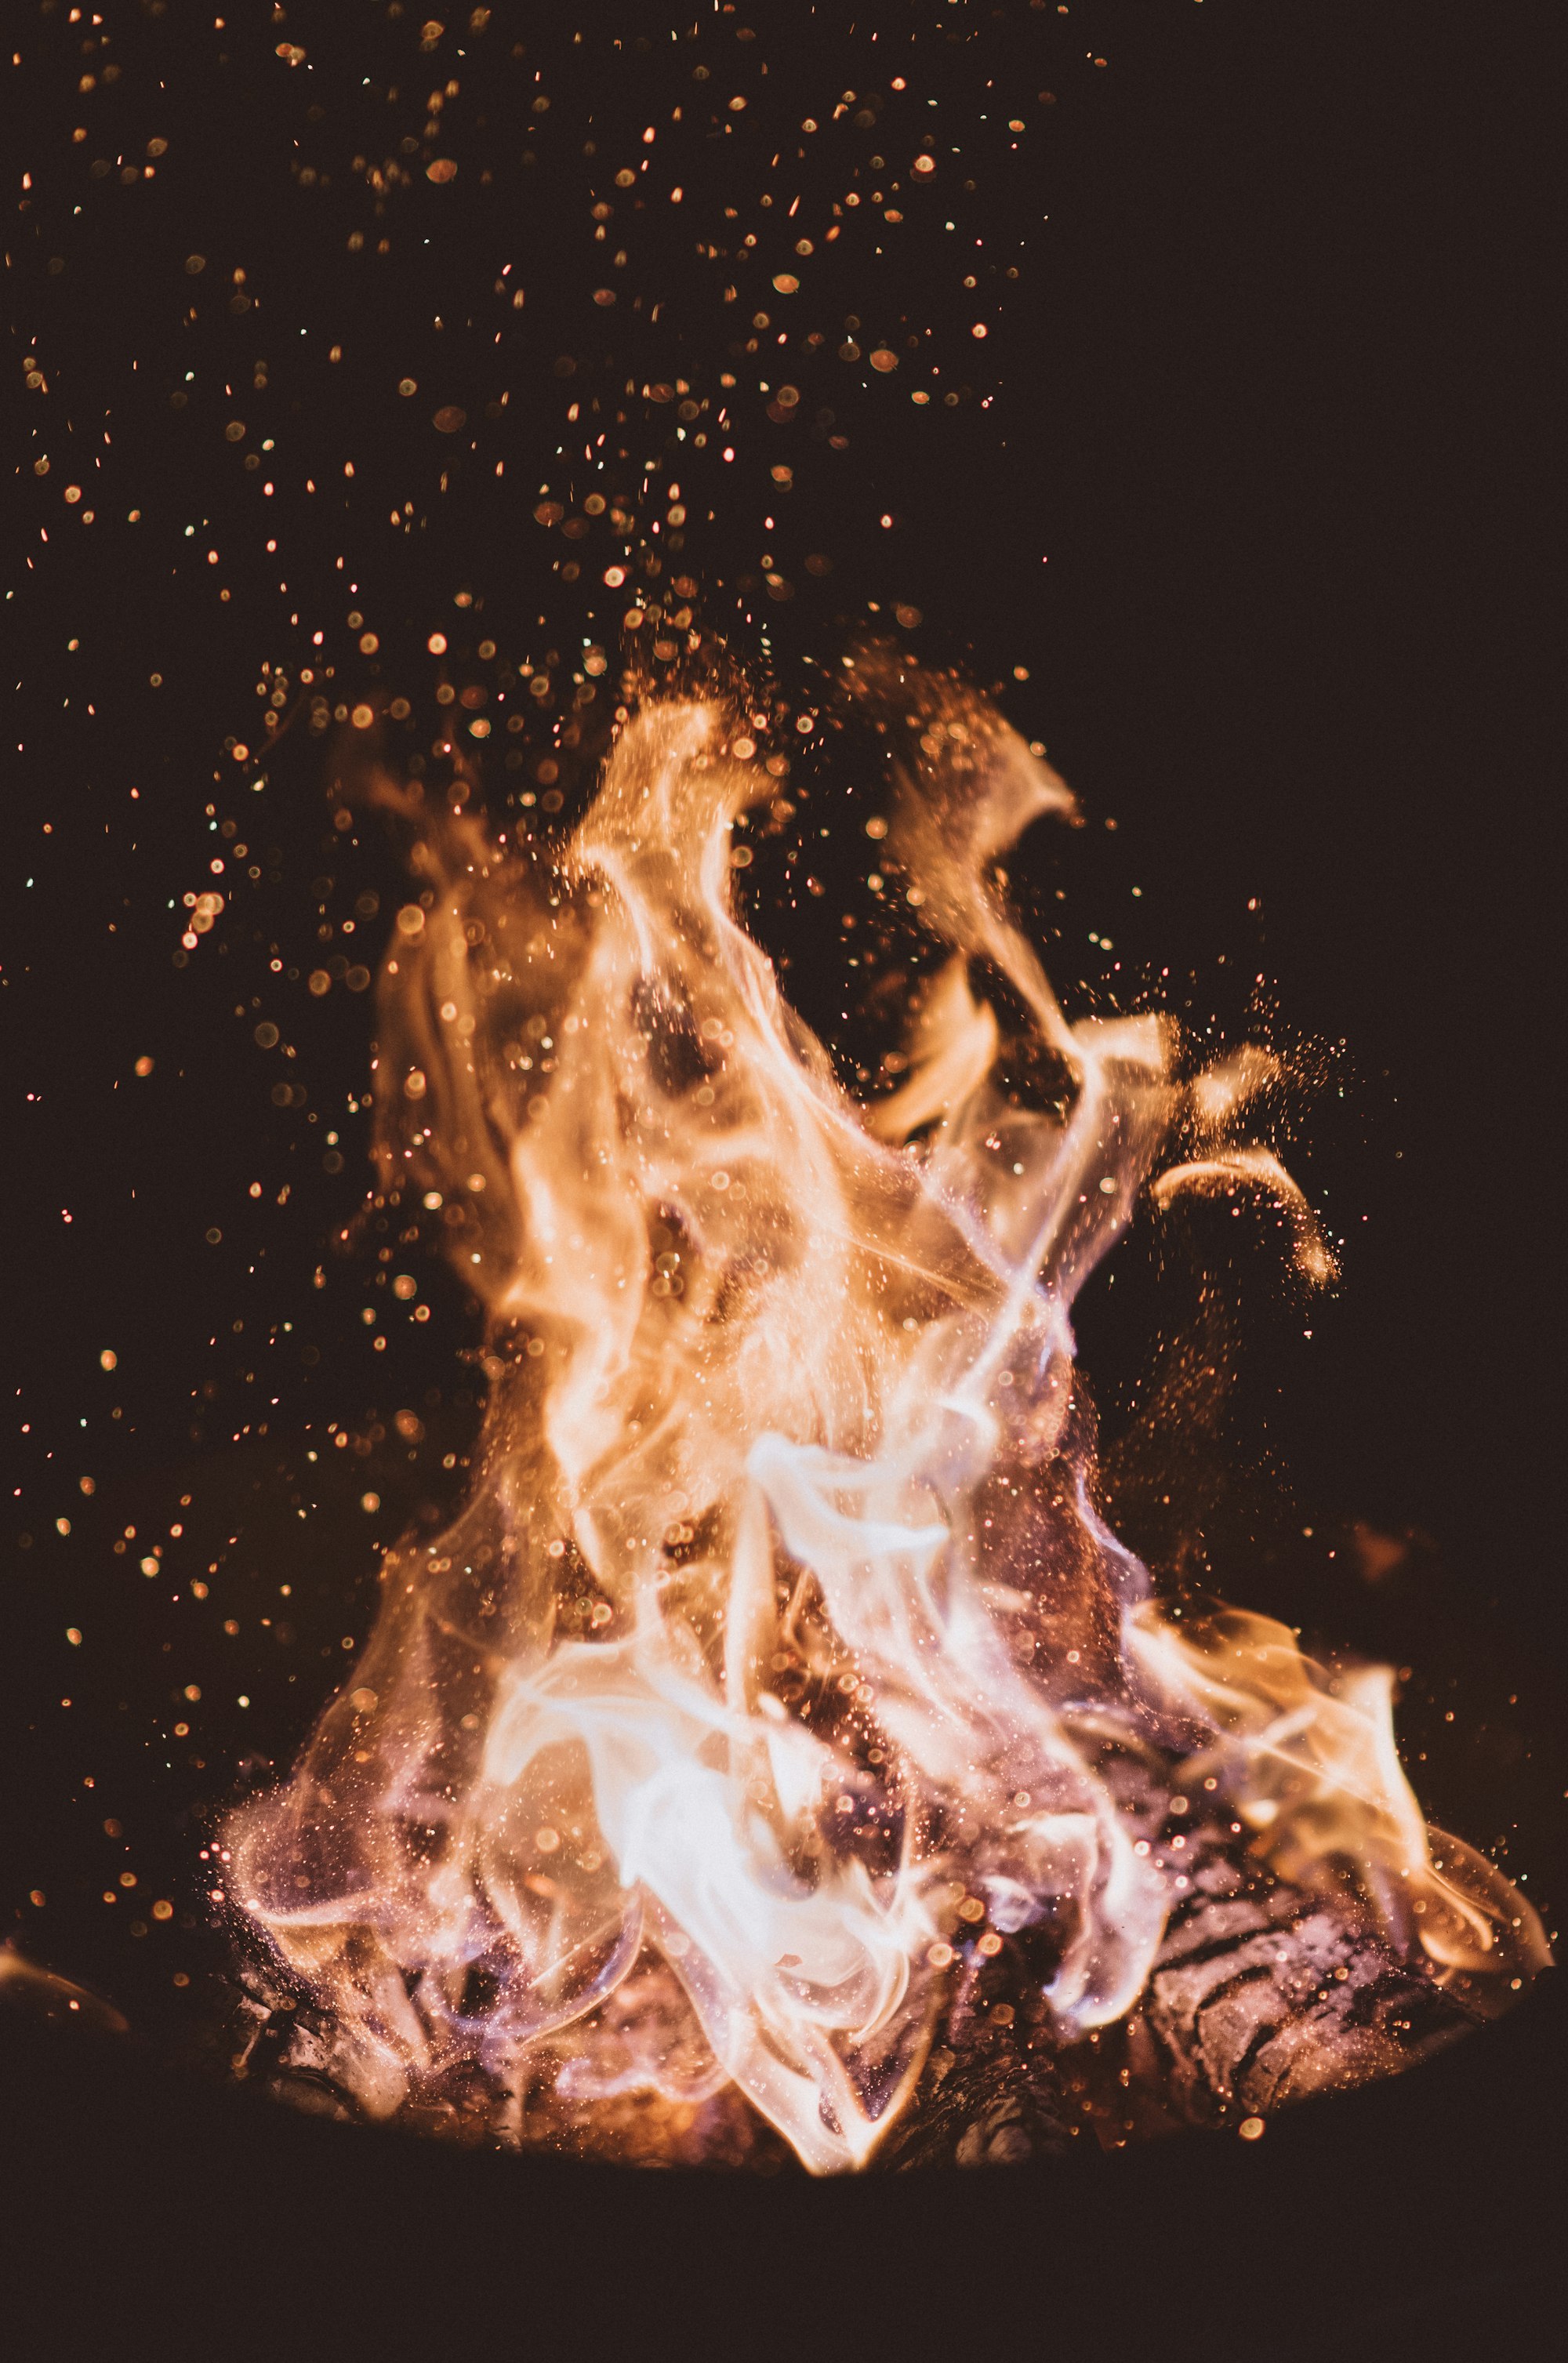 A close-up of a burning campfire.